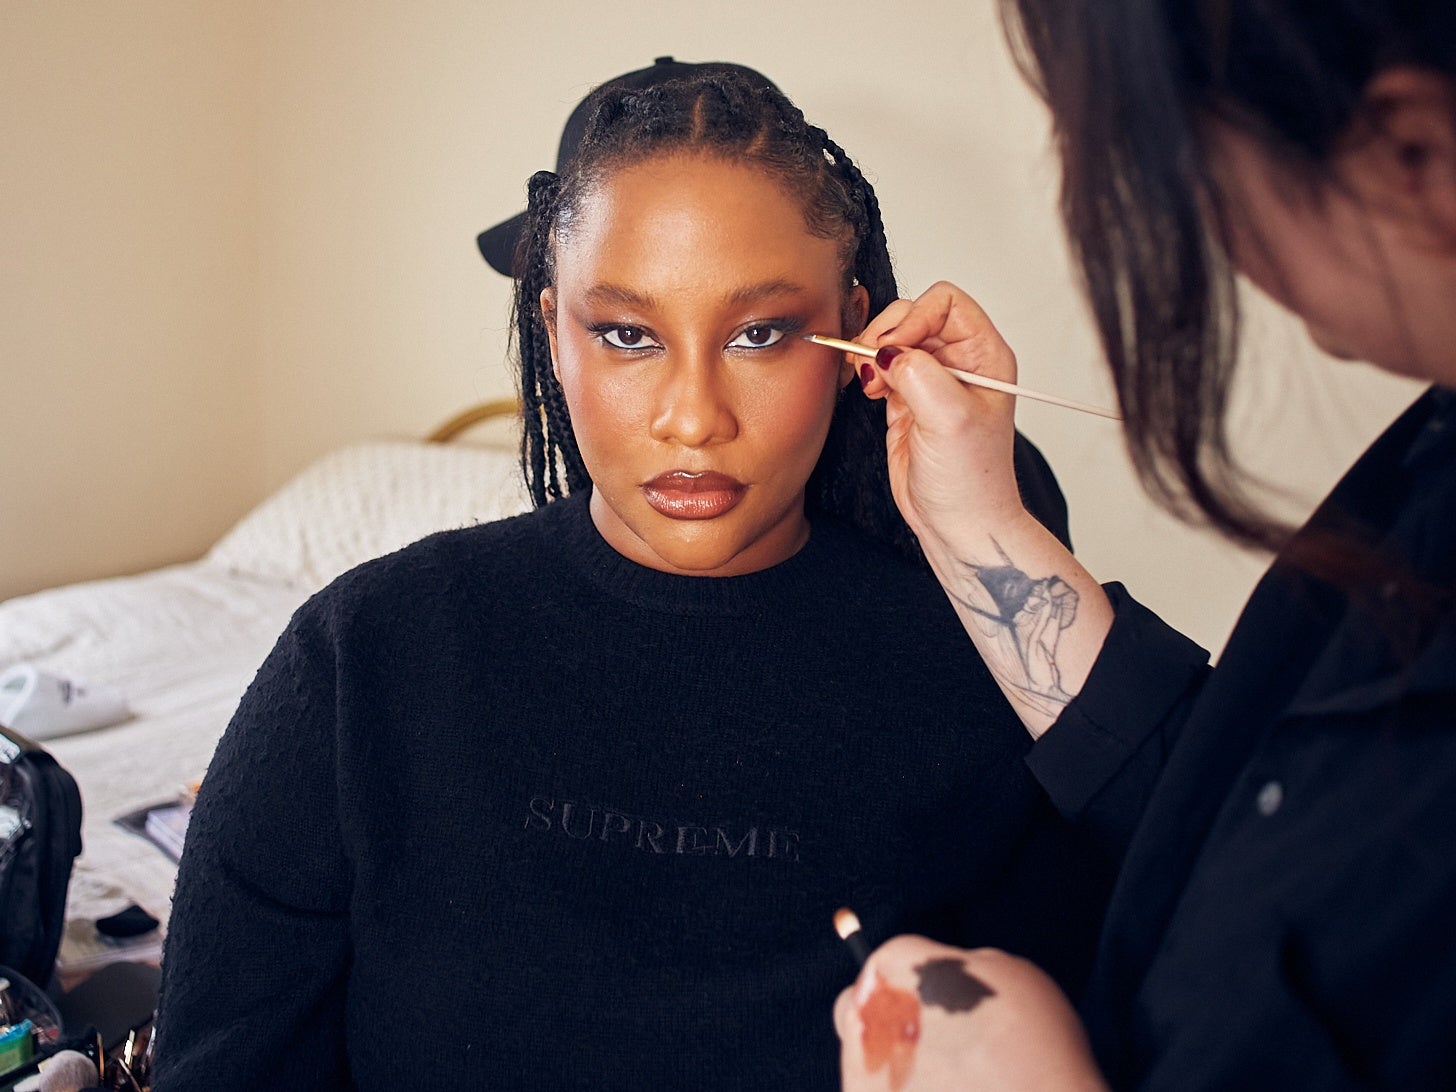 ESSENCE Beauty Diary: Zuri Marley Gets Ready For The “One Love” Film Premiere